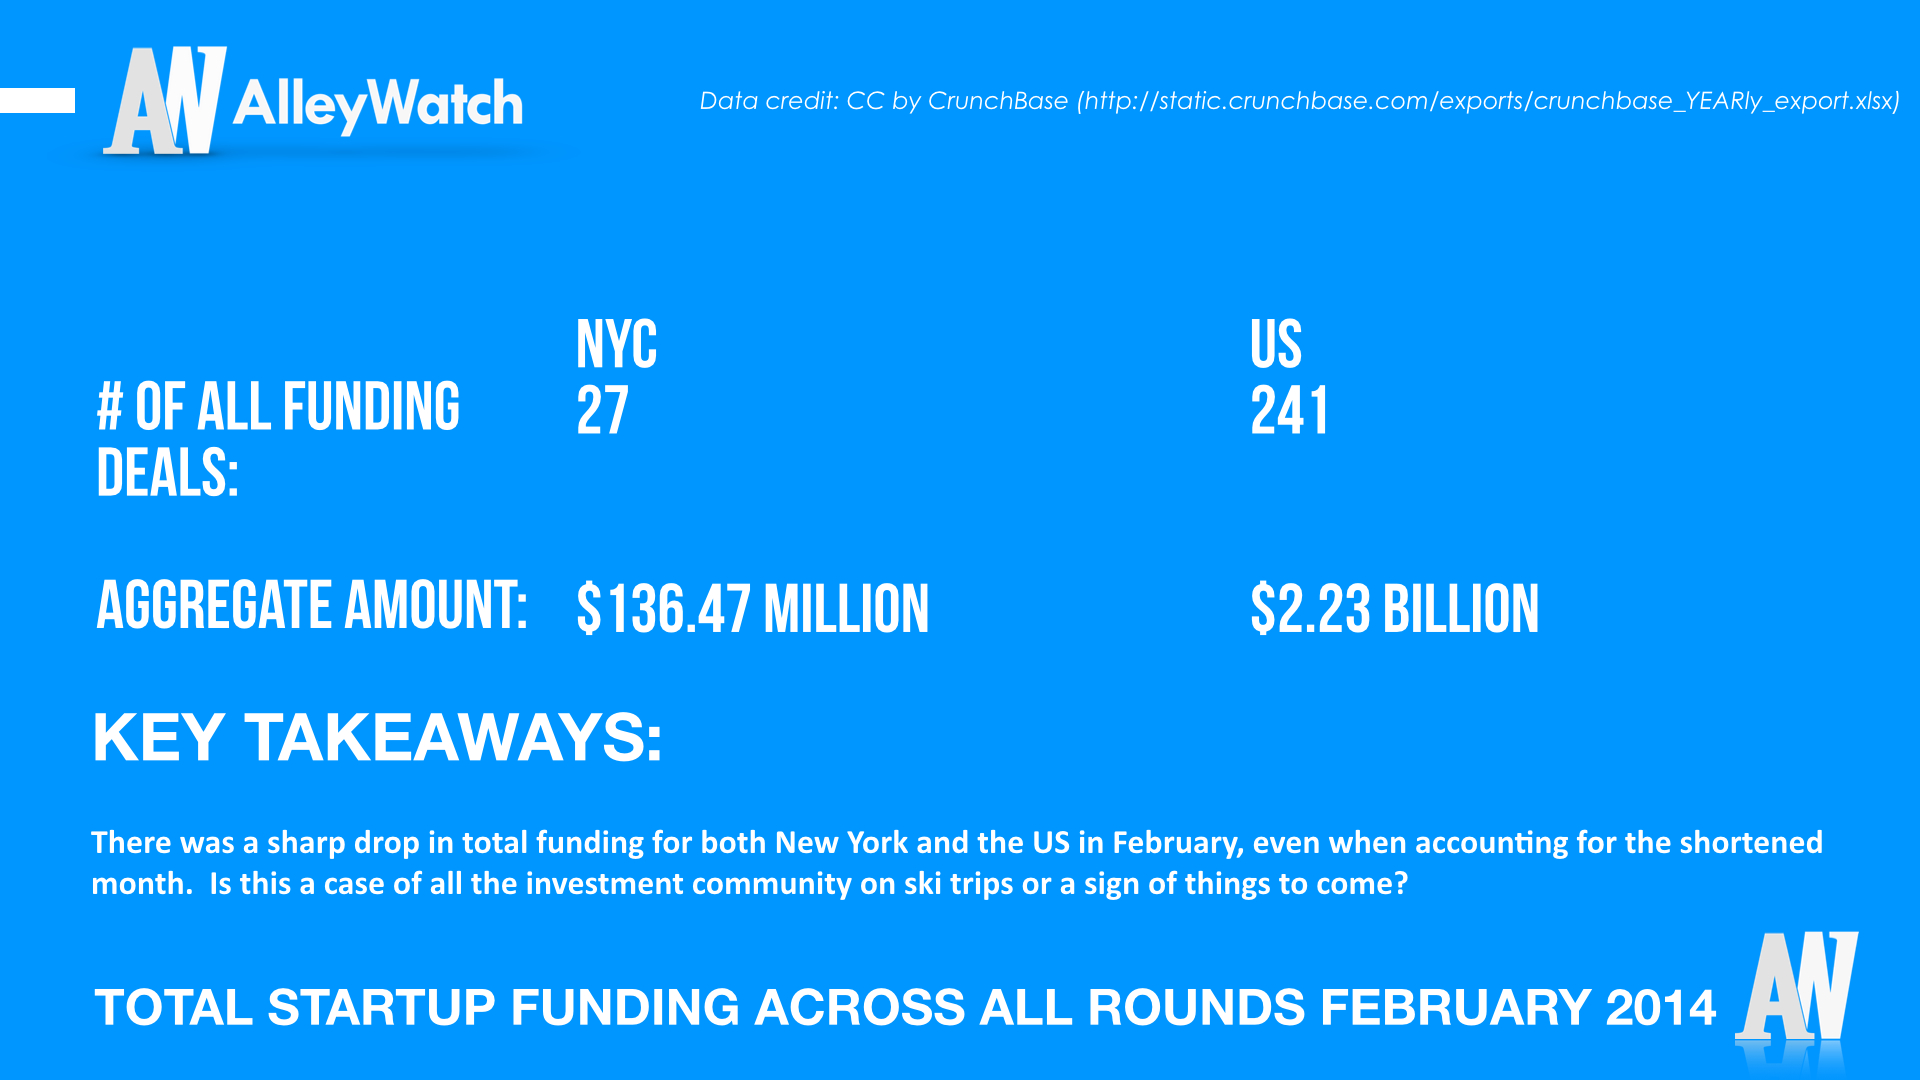 AlleyWatch January 2014 New York and US Venture Capital & Angel Investment Report.001